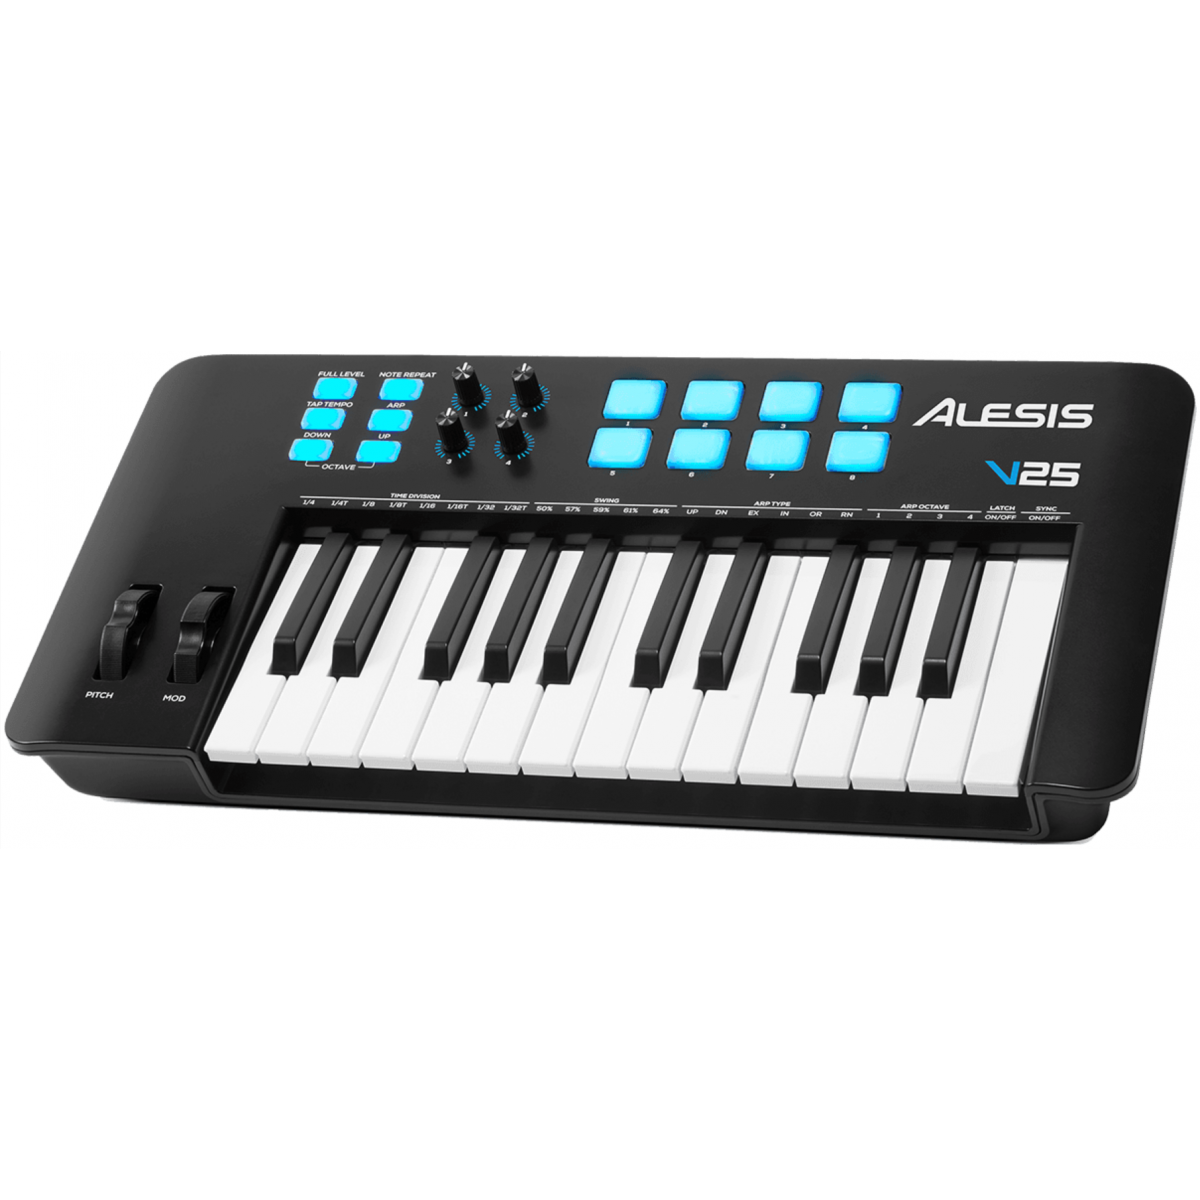 Claviers maitres compacts - Alesis - V25 MK2